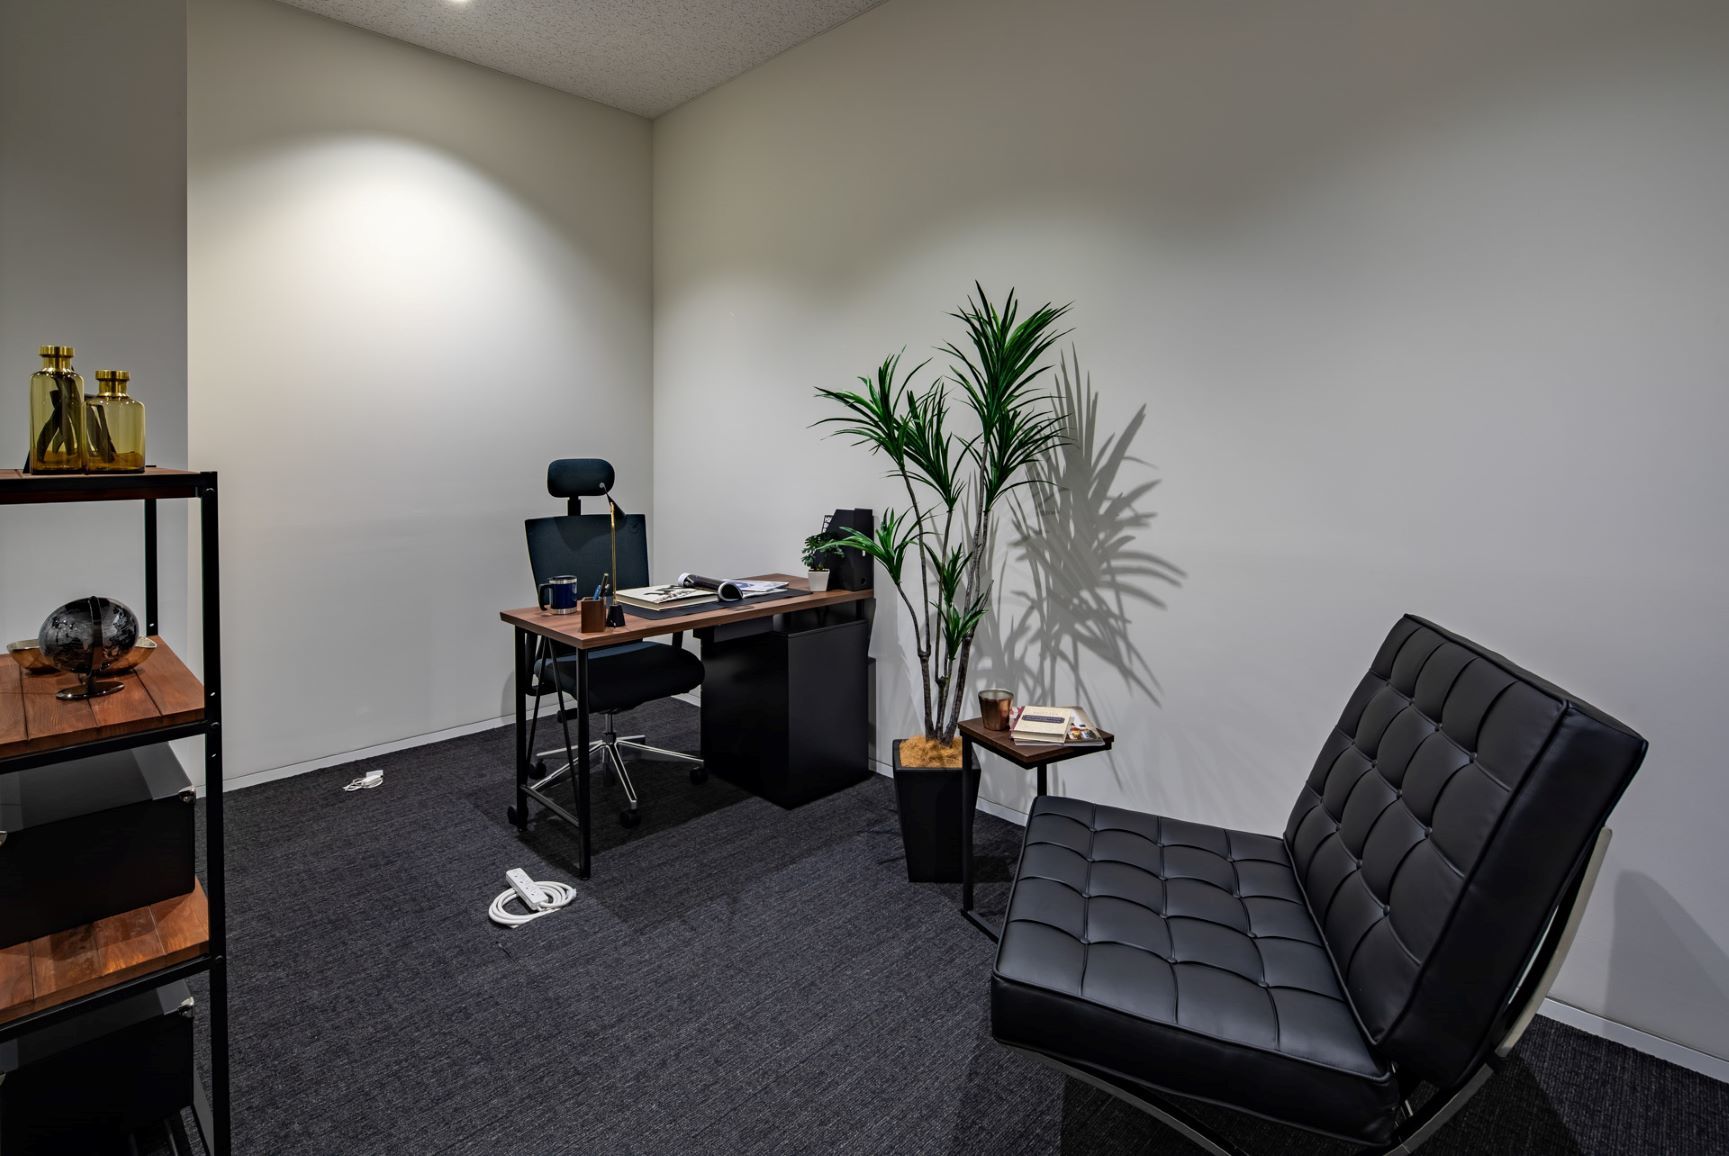 The room is equipped with functional office furniture.